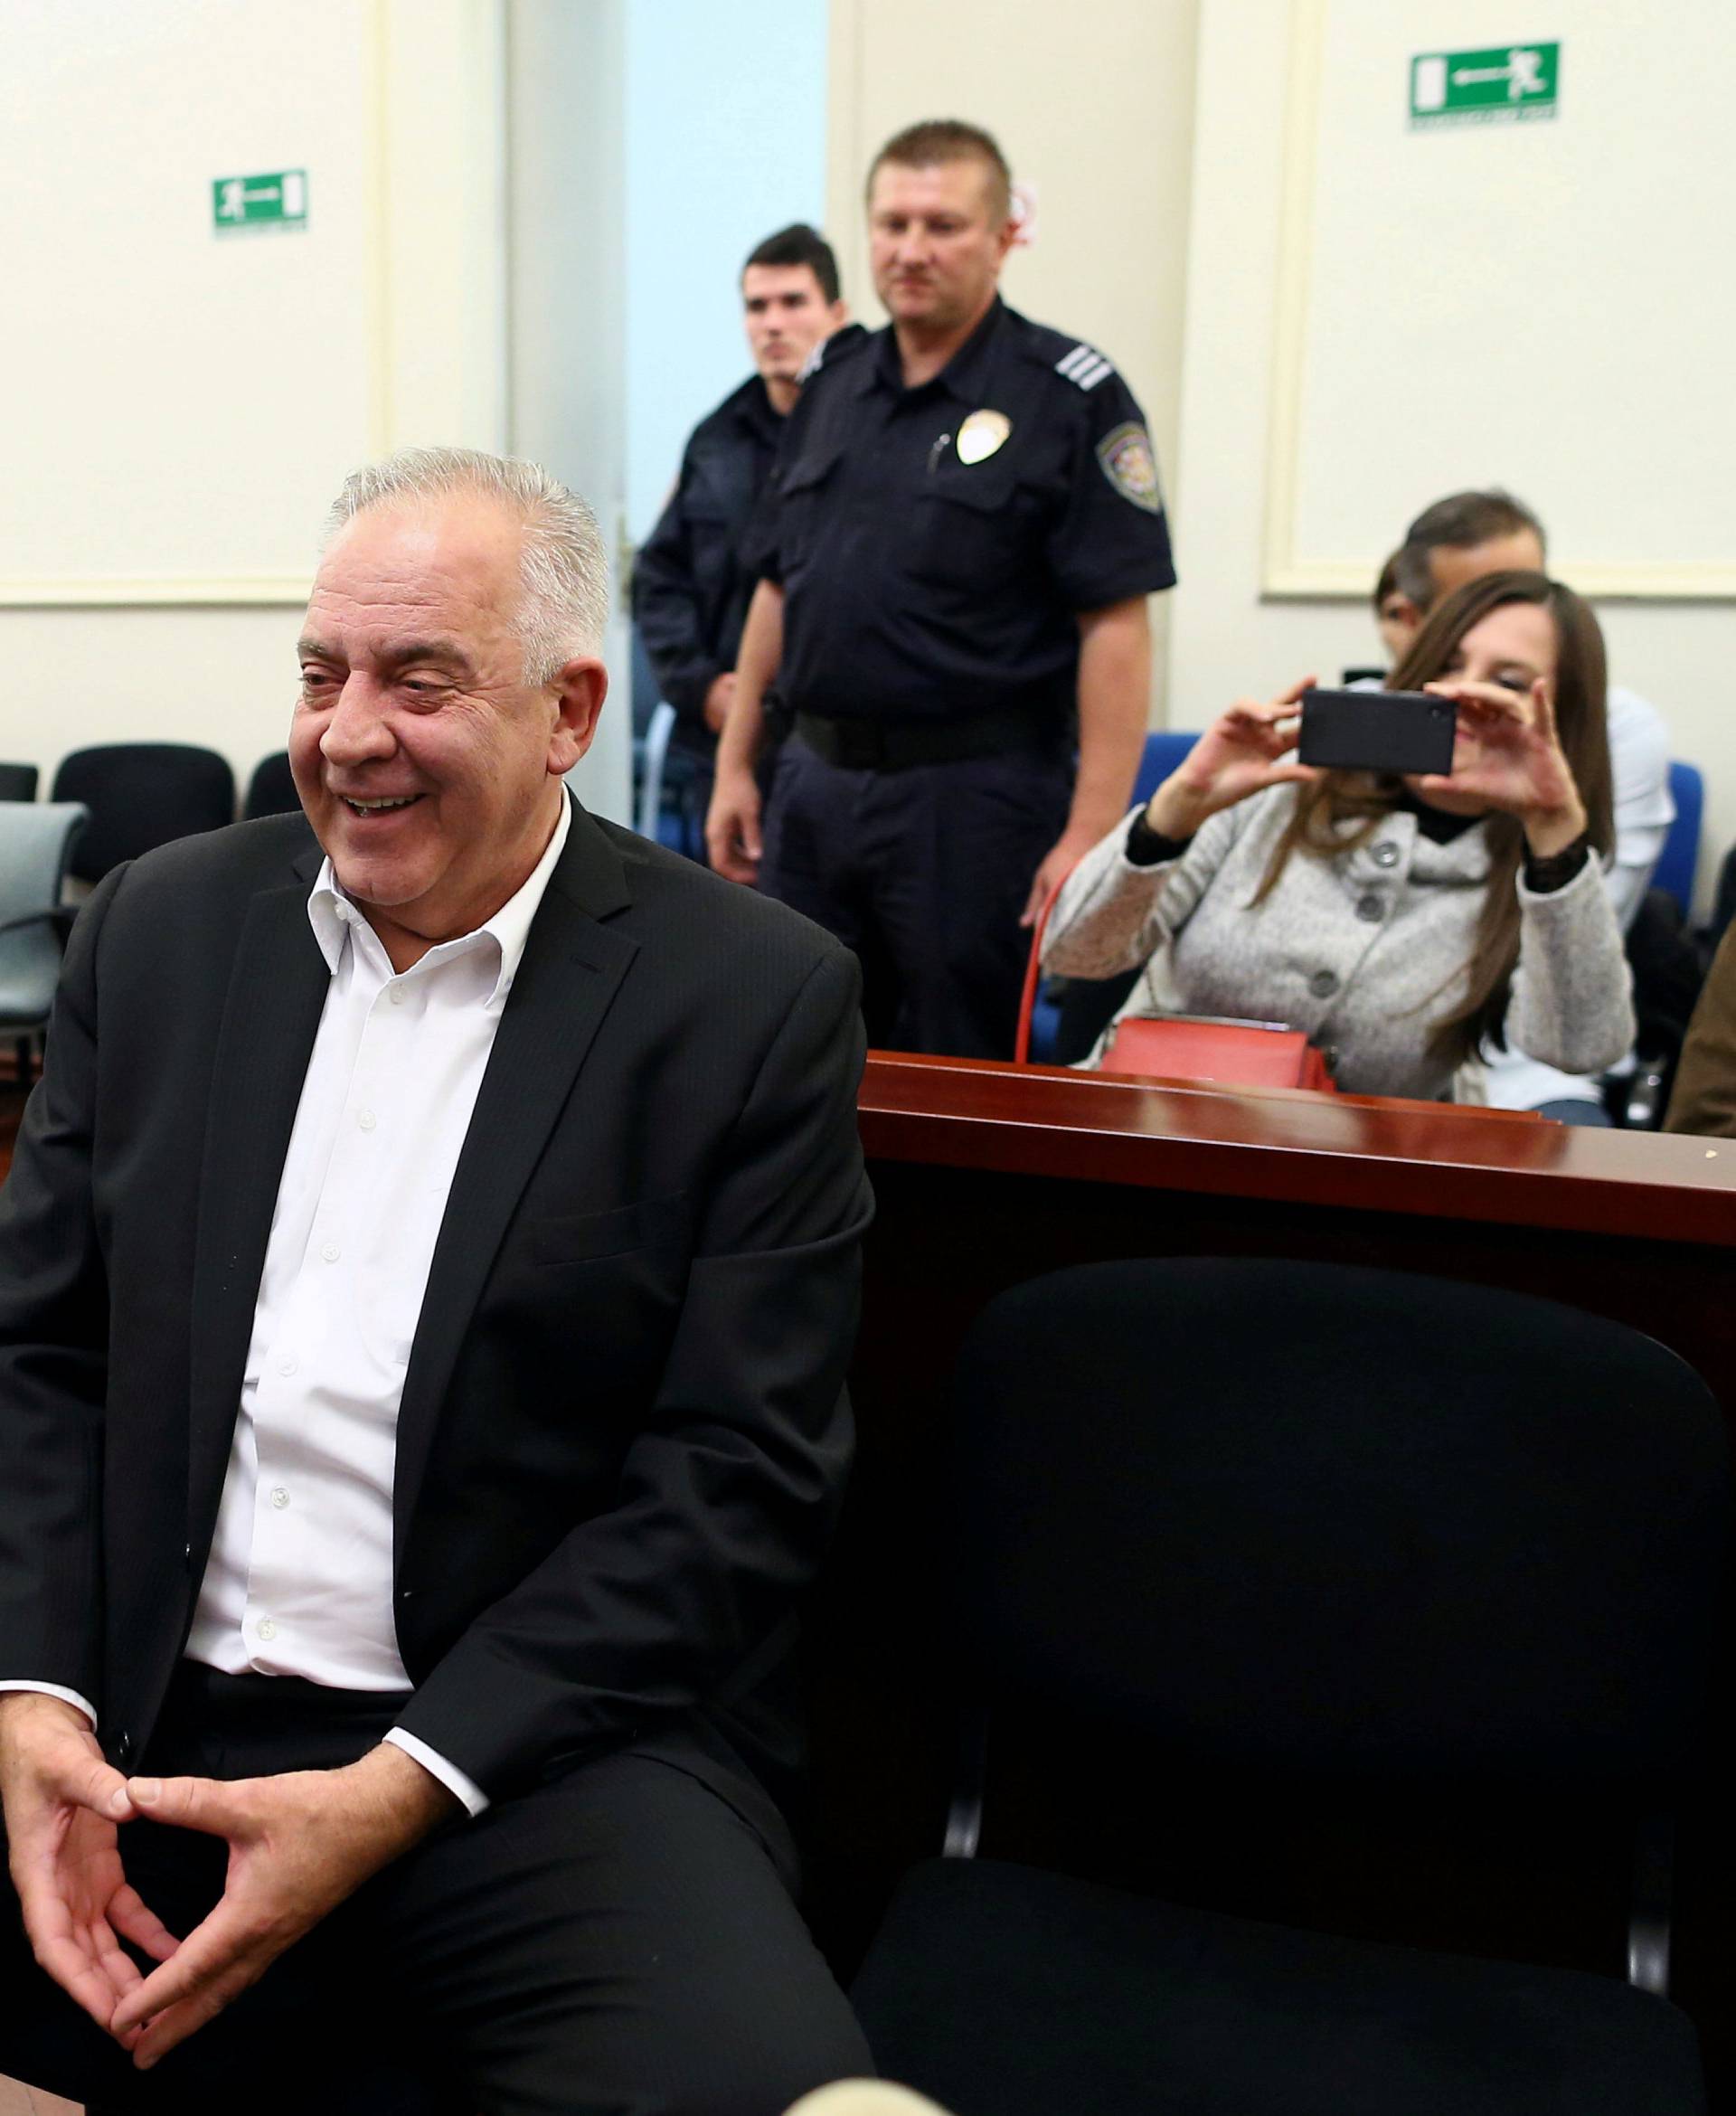 FILE PHOTO: Former Croatian Prime Minister Ivo Sanader is seen at a court during an announcement of a verdict in Zagreb